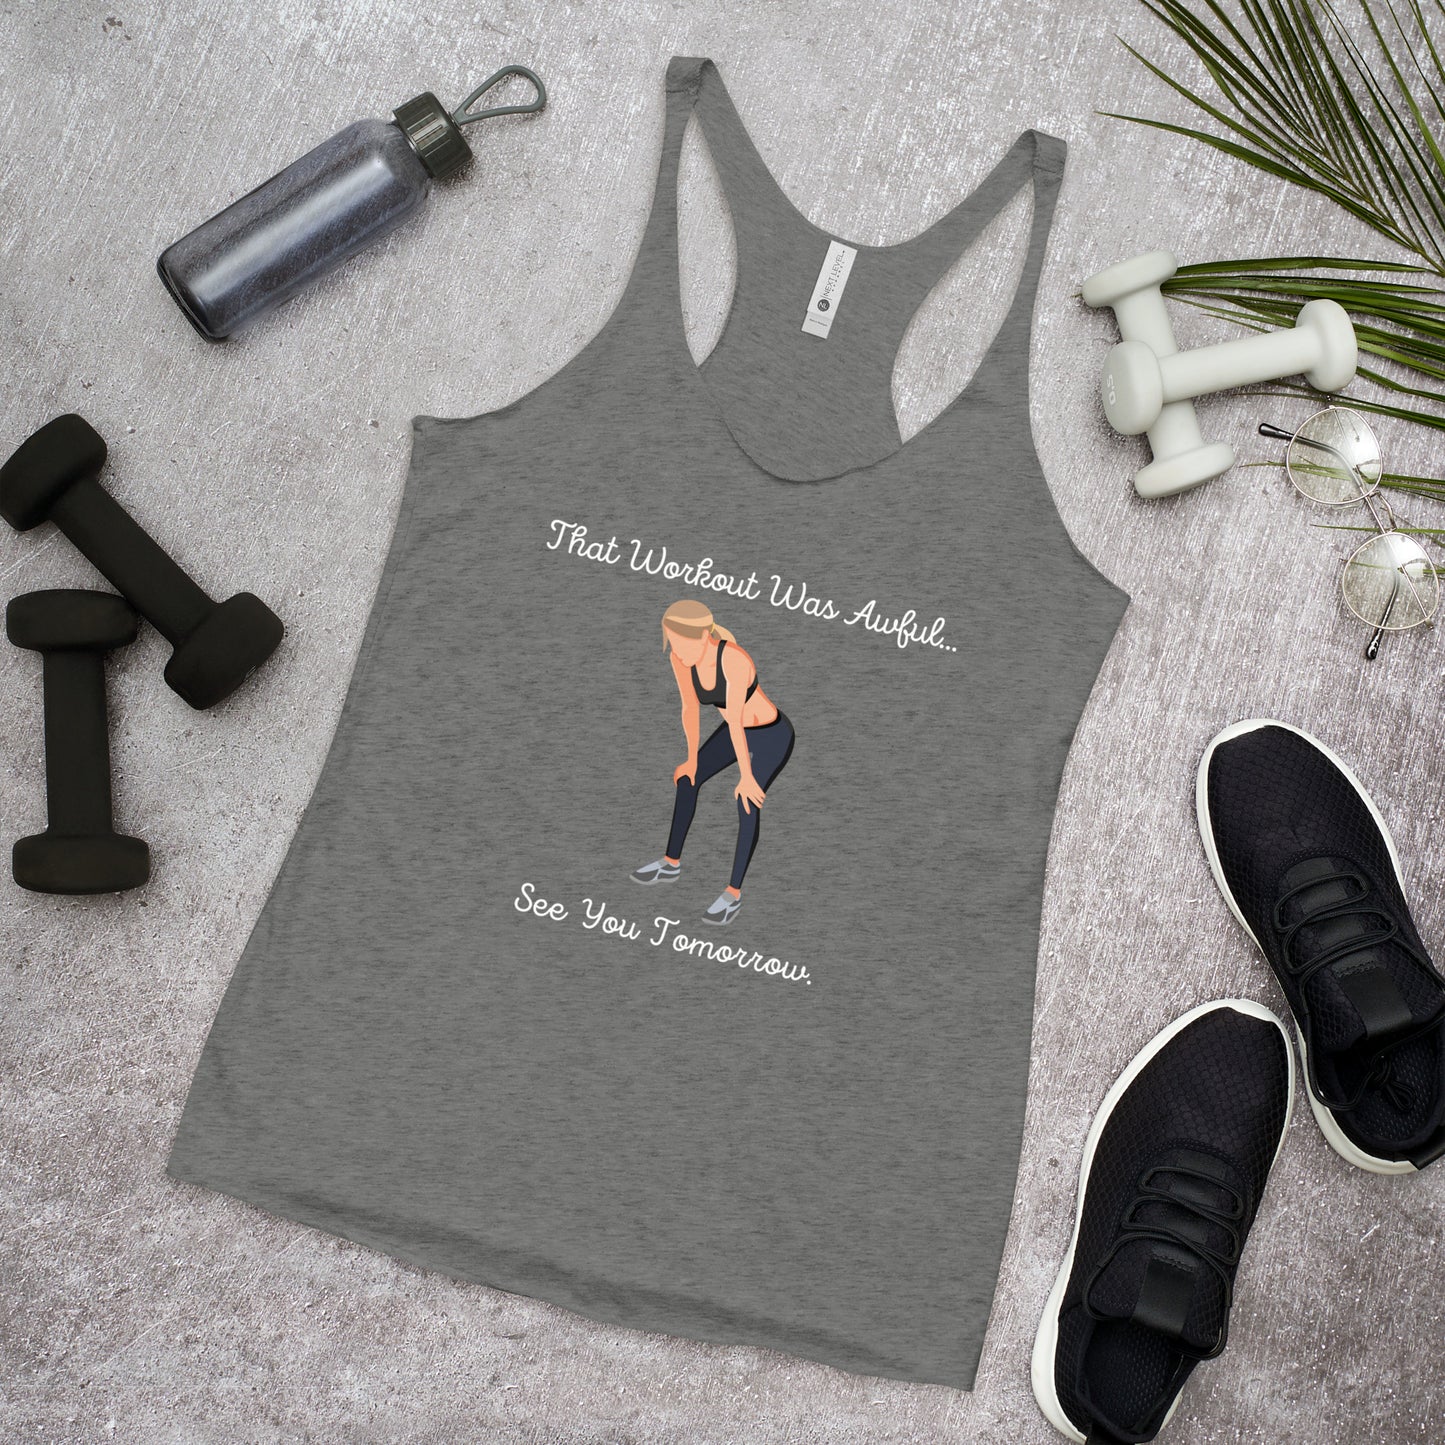 See you Tomorrow Funny Crossfit Tank Top, Crossfit Tank for Women, Workout Shirt for Women, Crossfit Gifts, Funny Gym